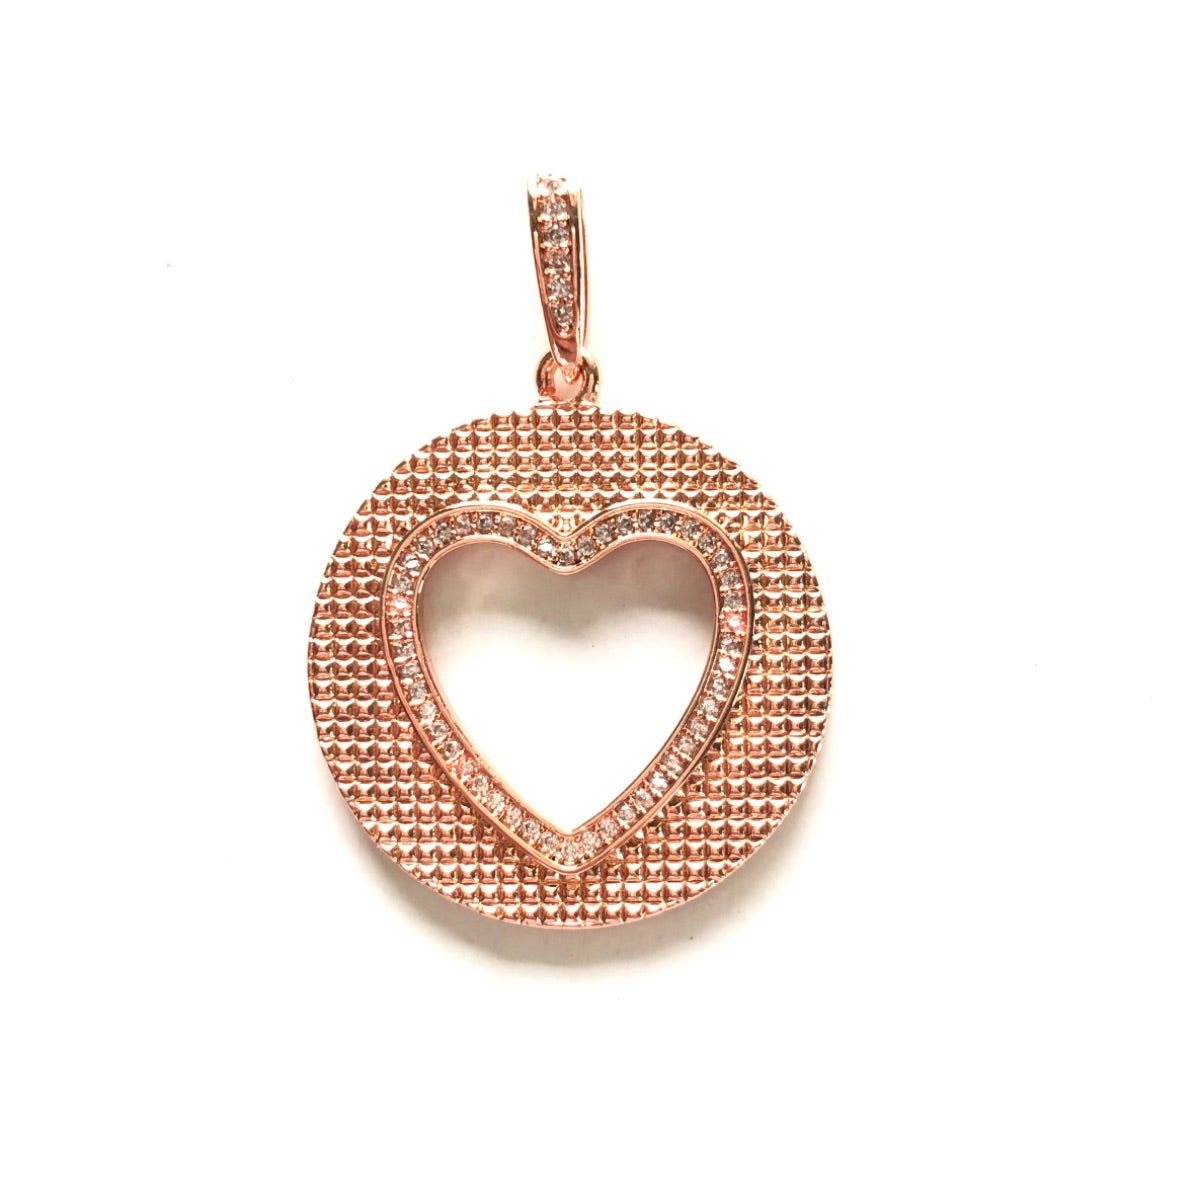 10pcs/lot 40*28.3mm CZ Pave Round Hollow Heart Charms Rose Gold CZ Paved Charms Discs Hearts On Sale Charms Beads Beyond